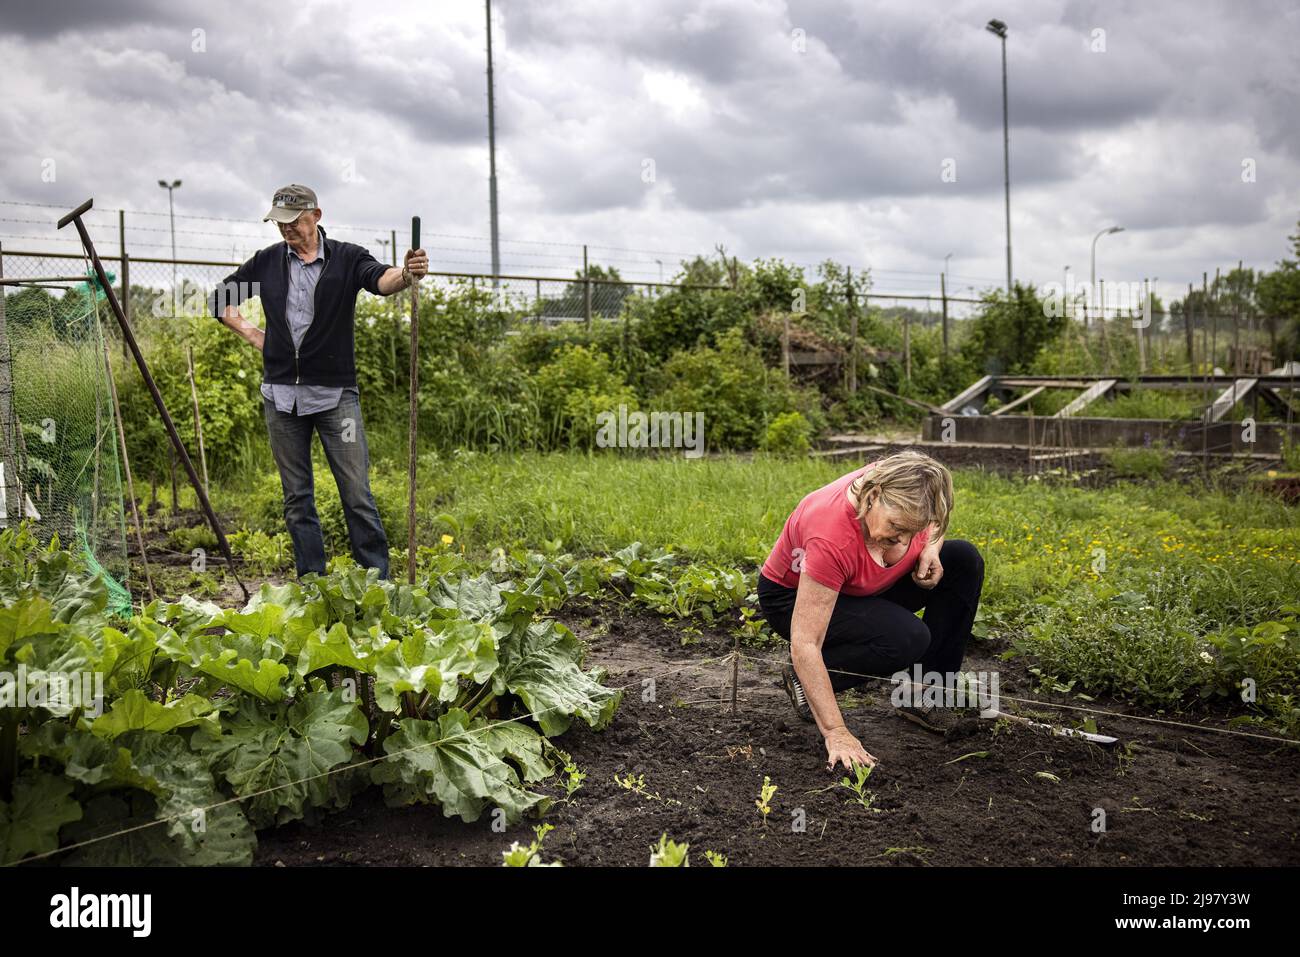 2022-05-21 12:32:28 UTRECHT - People grow their own vegetables in their vegetable garden on a plot of land at the Koningshof urban agriculture initiative. ANP RAMON VAN FLYMEN netherlands out - belgium out Stock Photo